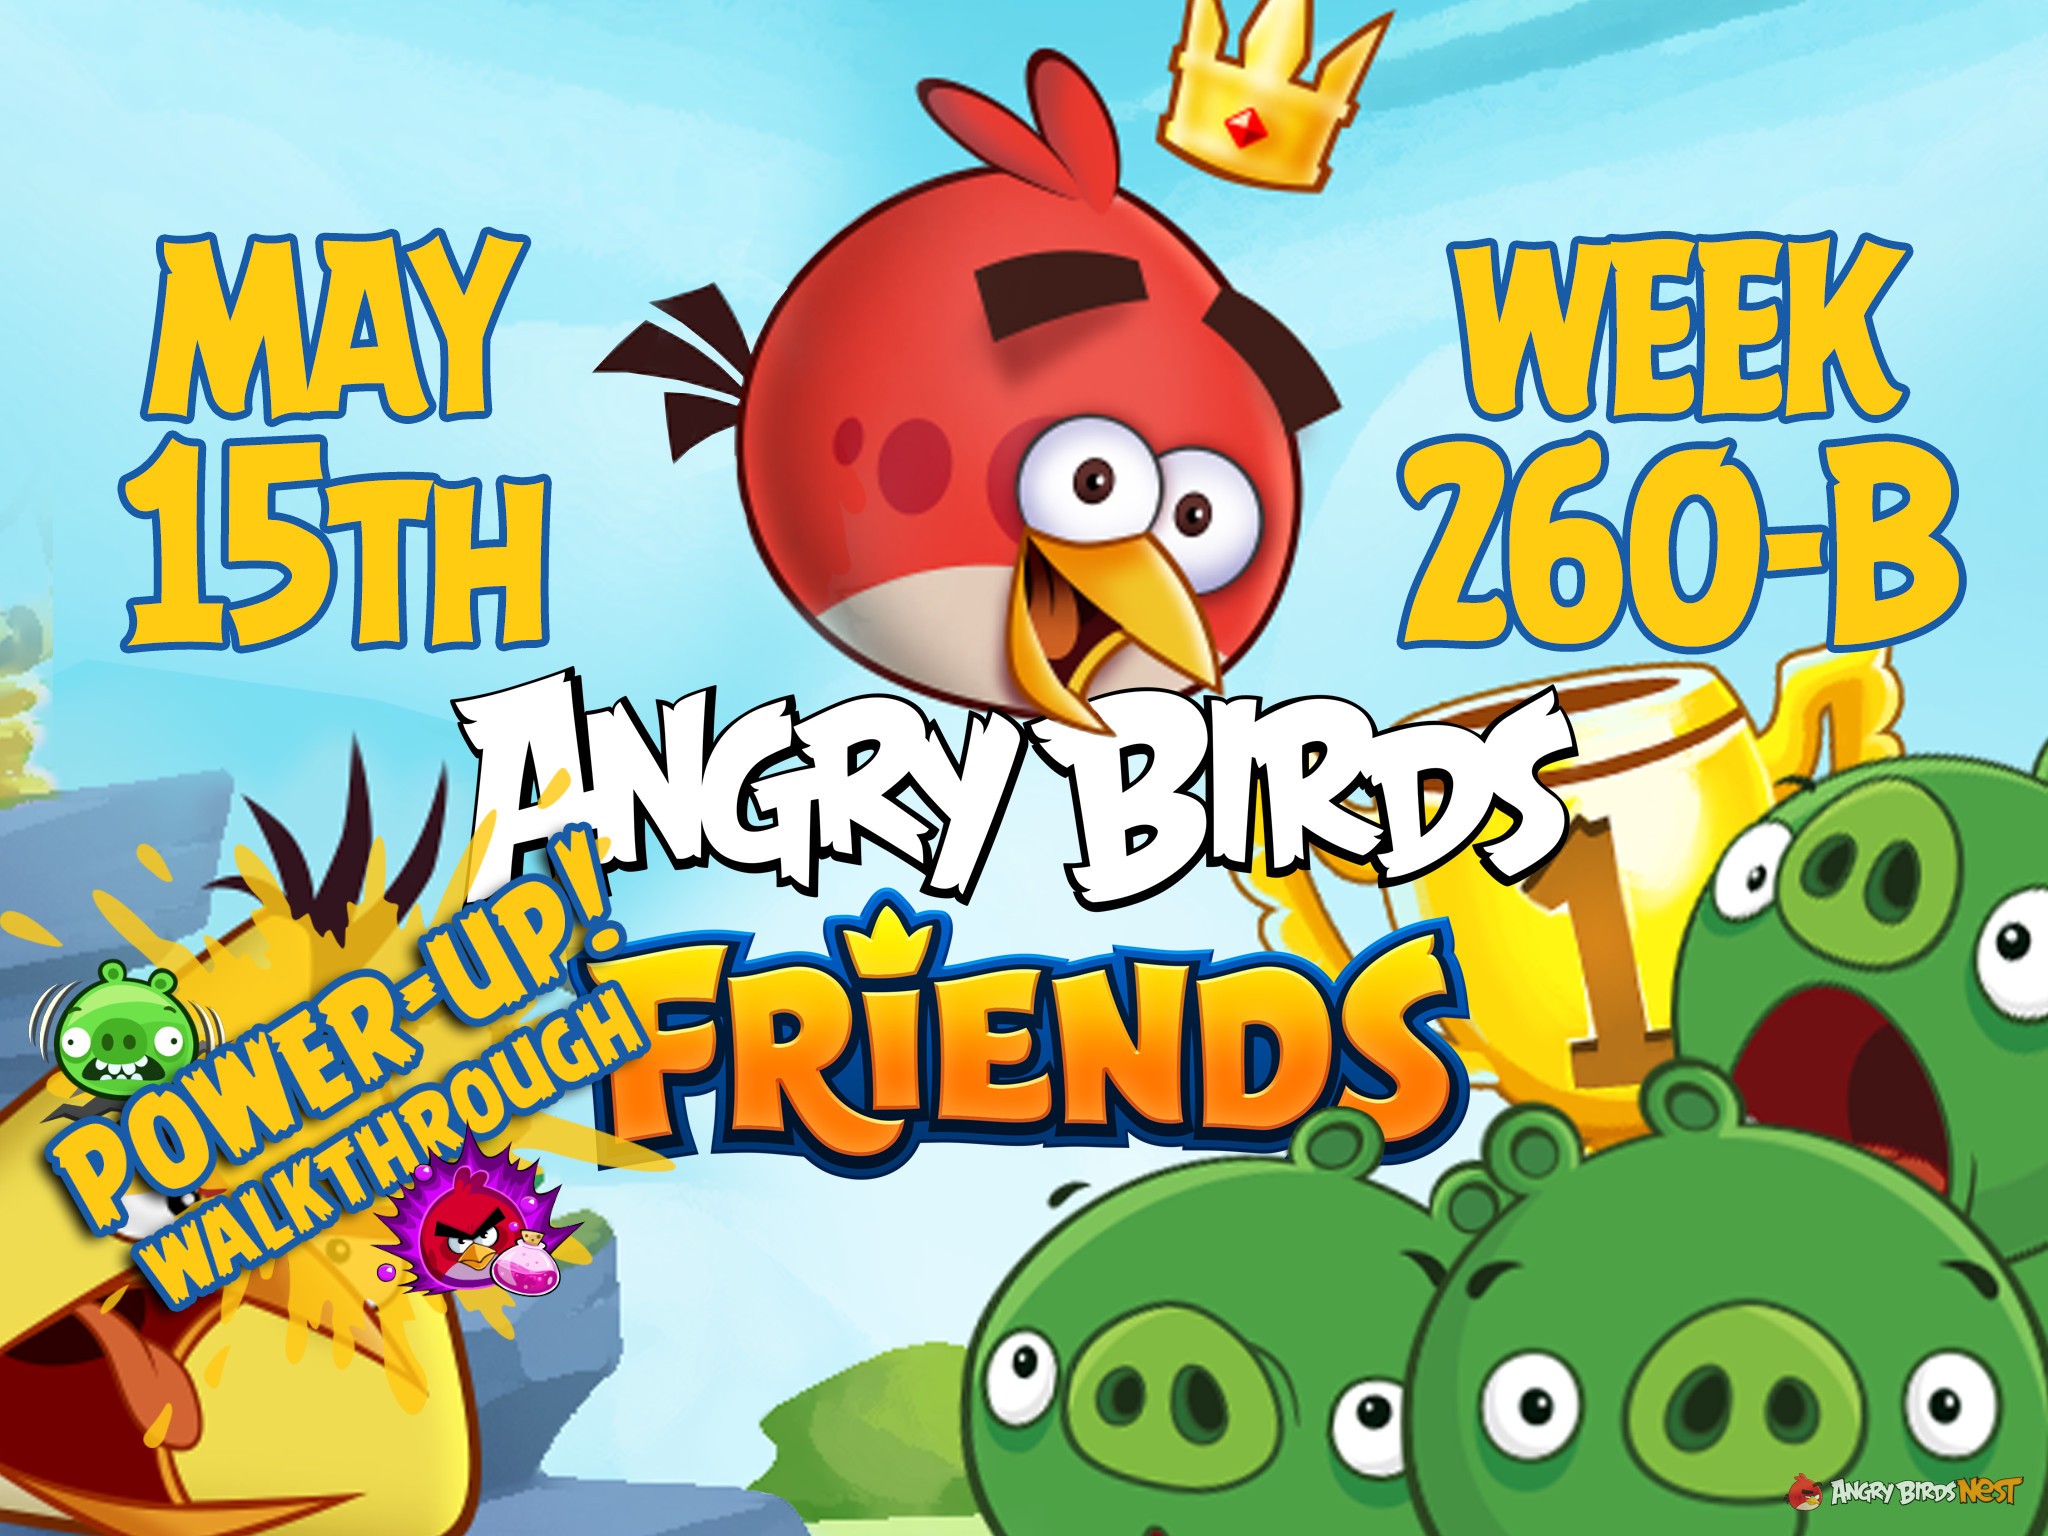 Angry Birds Friends Tournament Week 260-B Feature Image PU